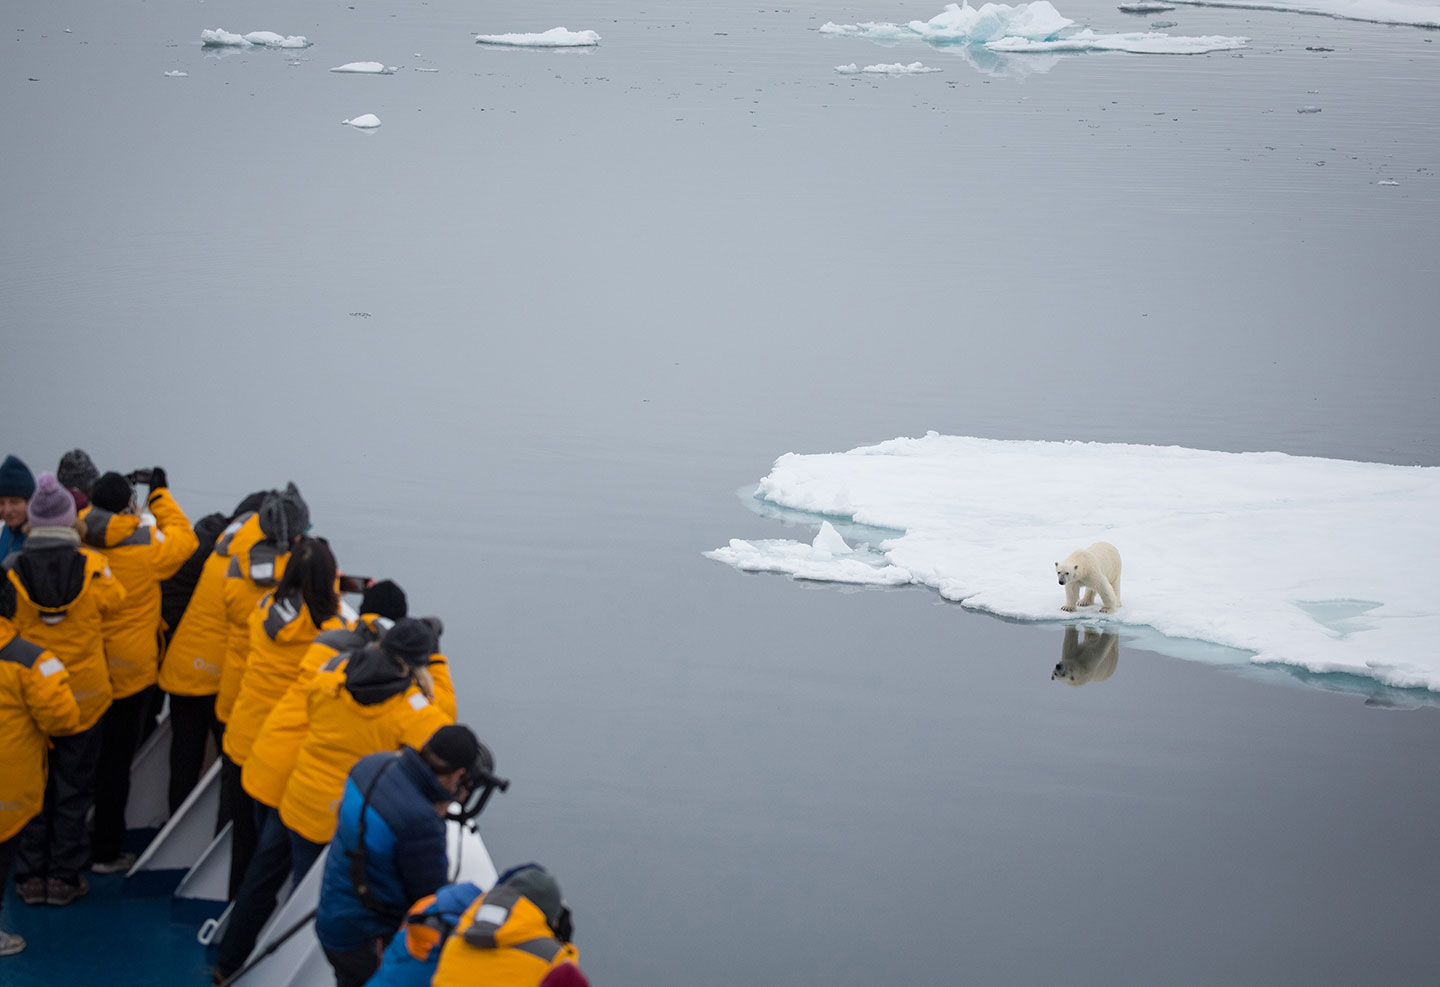 Guests have an excellent vantage point on the deck of a Quark Expeditions polar vessel in the Norwegian Arctic. Polar bears are most often seen along the ice edge searching for food, namely seals.